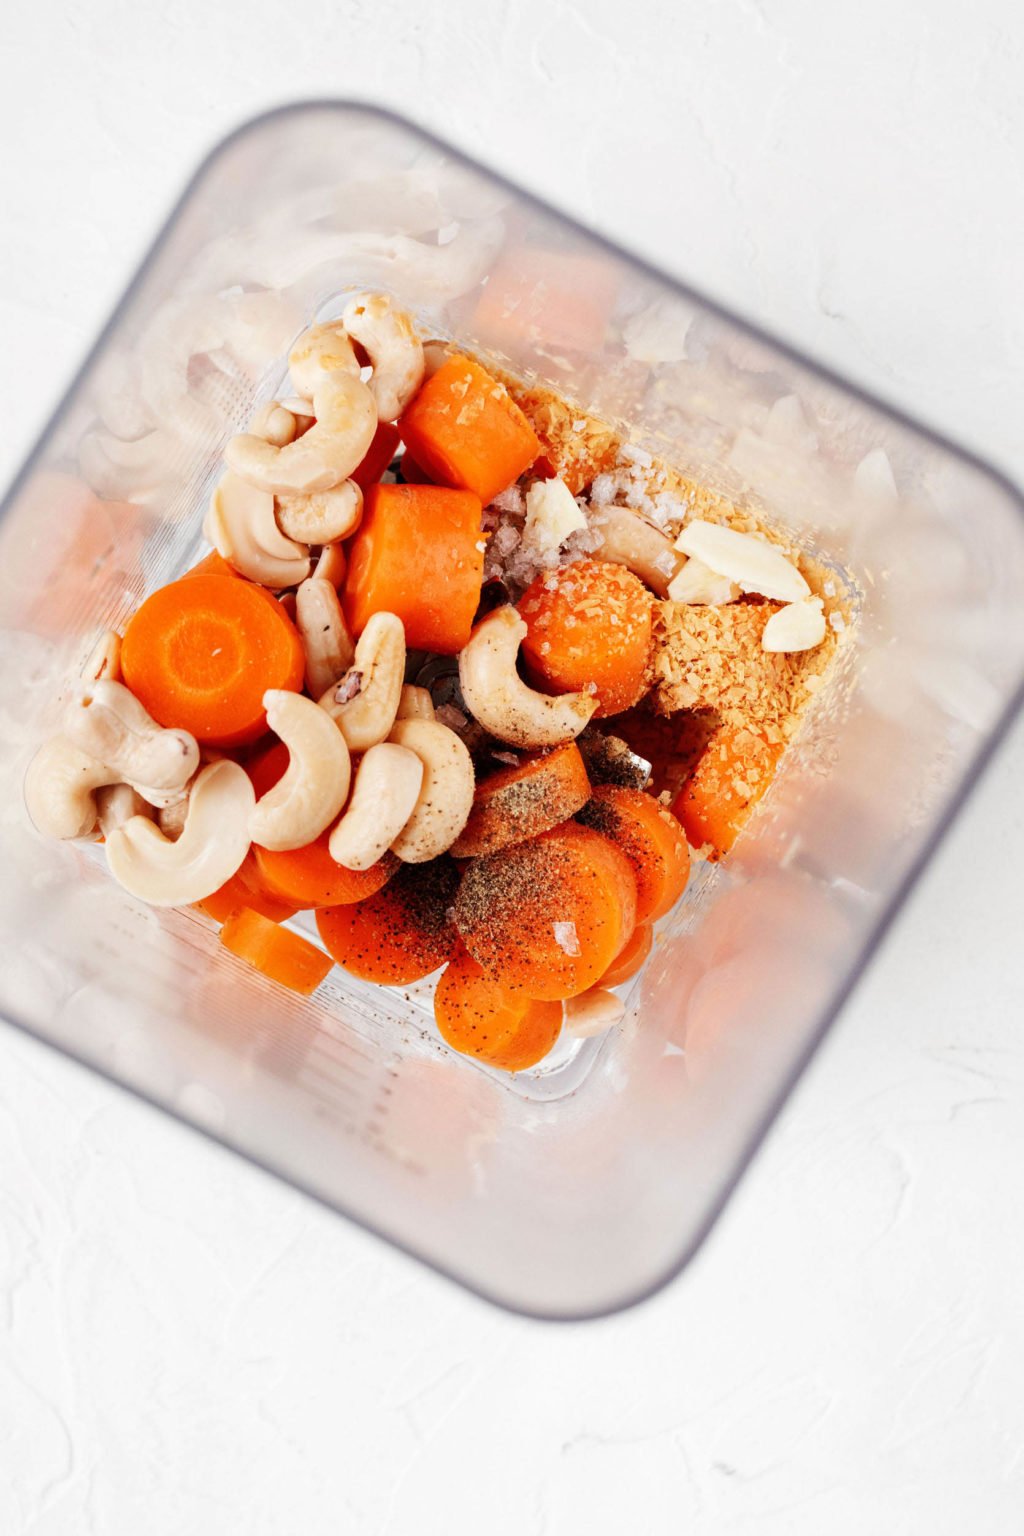 An overhead image of the container of a blender. It's filled with carrots, cashews, and various seasonings.